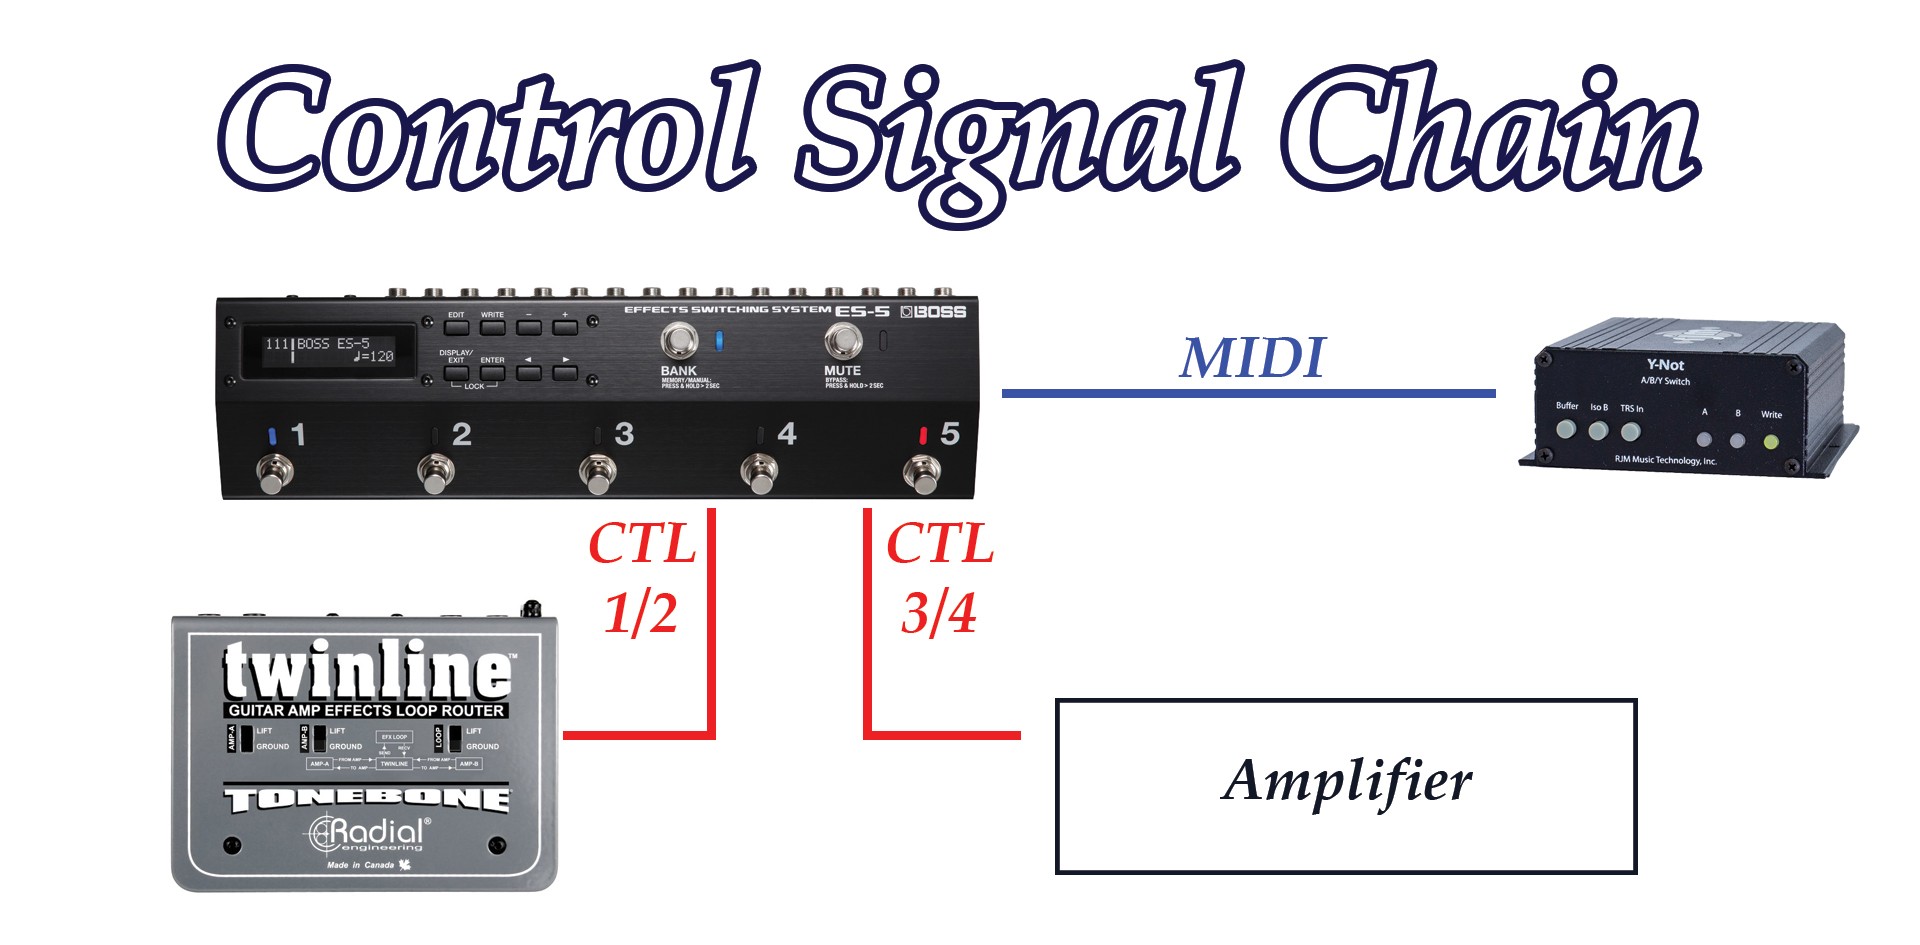 Image depicting the signal chain of control signal that connects all of the devices and allows them to talk to one another